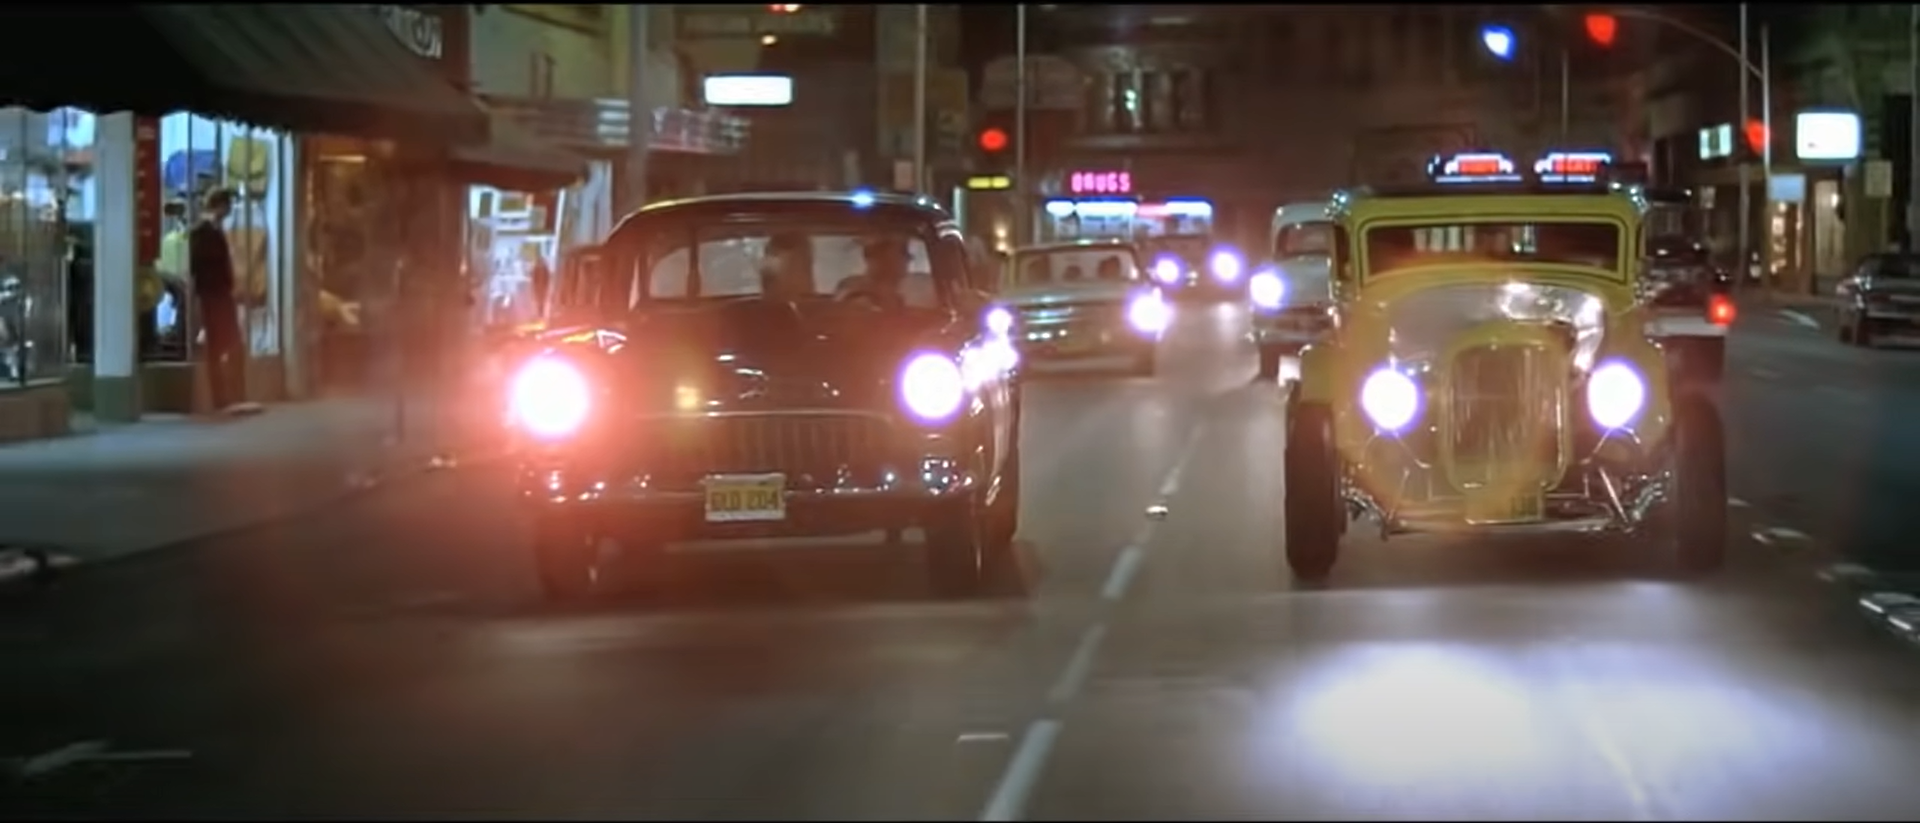 AMERICAN GRAFFITI - Bob Falfa's (Harrison Ford) Screen-Matched 55 Chevy License Plate - Image 6 of 6